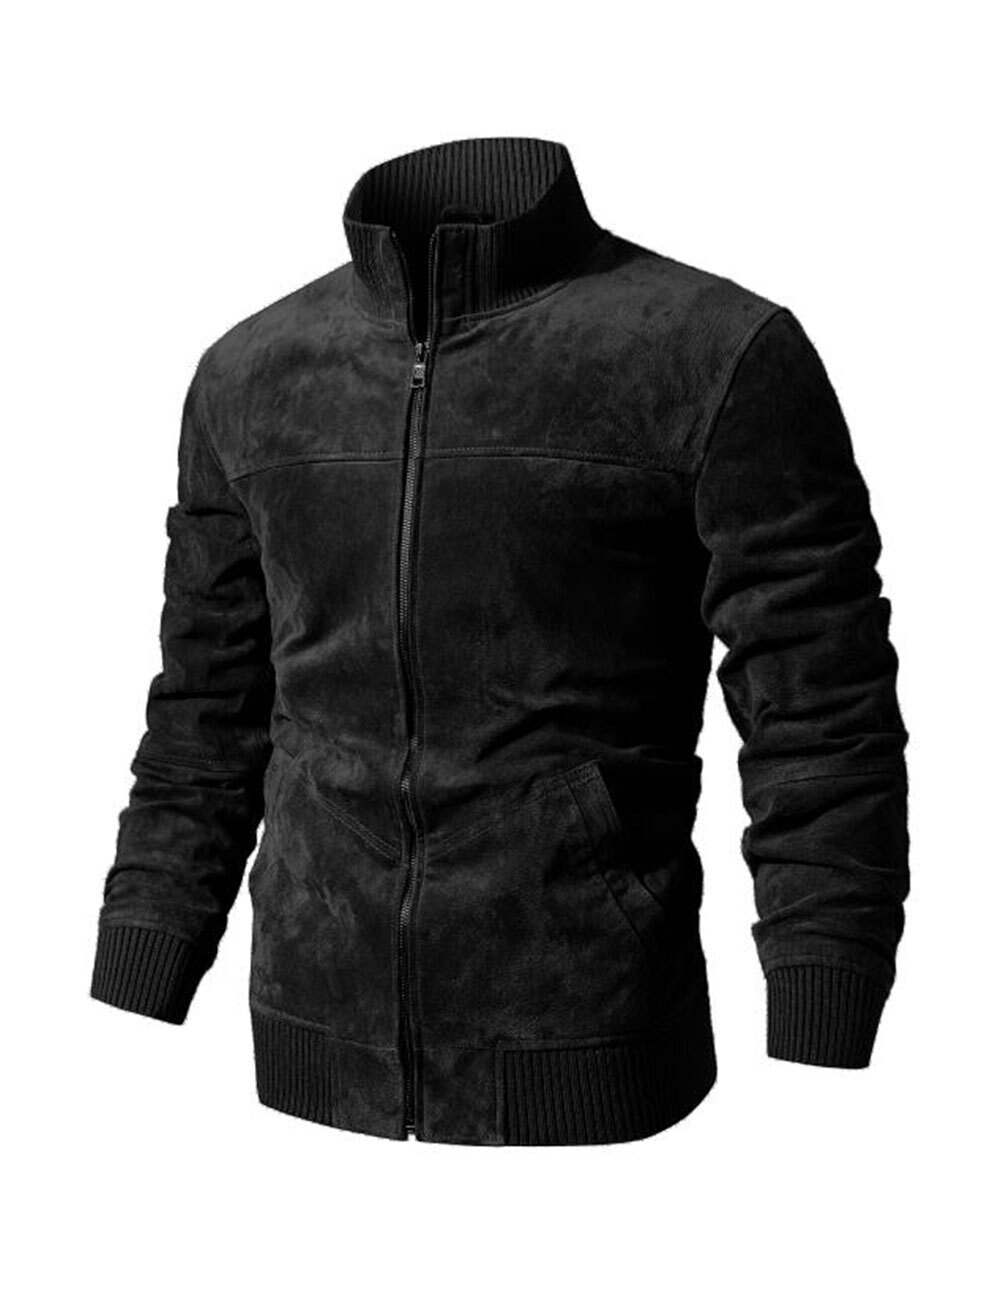 FLAVOR Men's Real Leather Jacket Pigskin Genuine Leather Coat With Rib Cuff Standing Collar 15-23B 